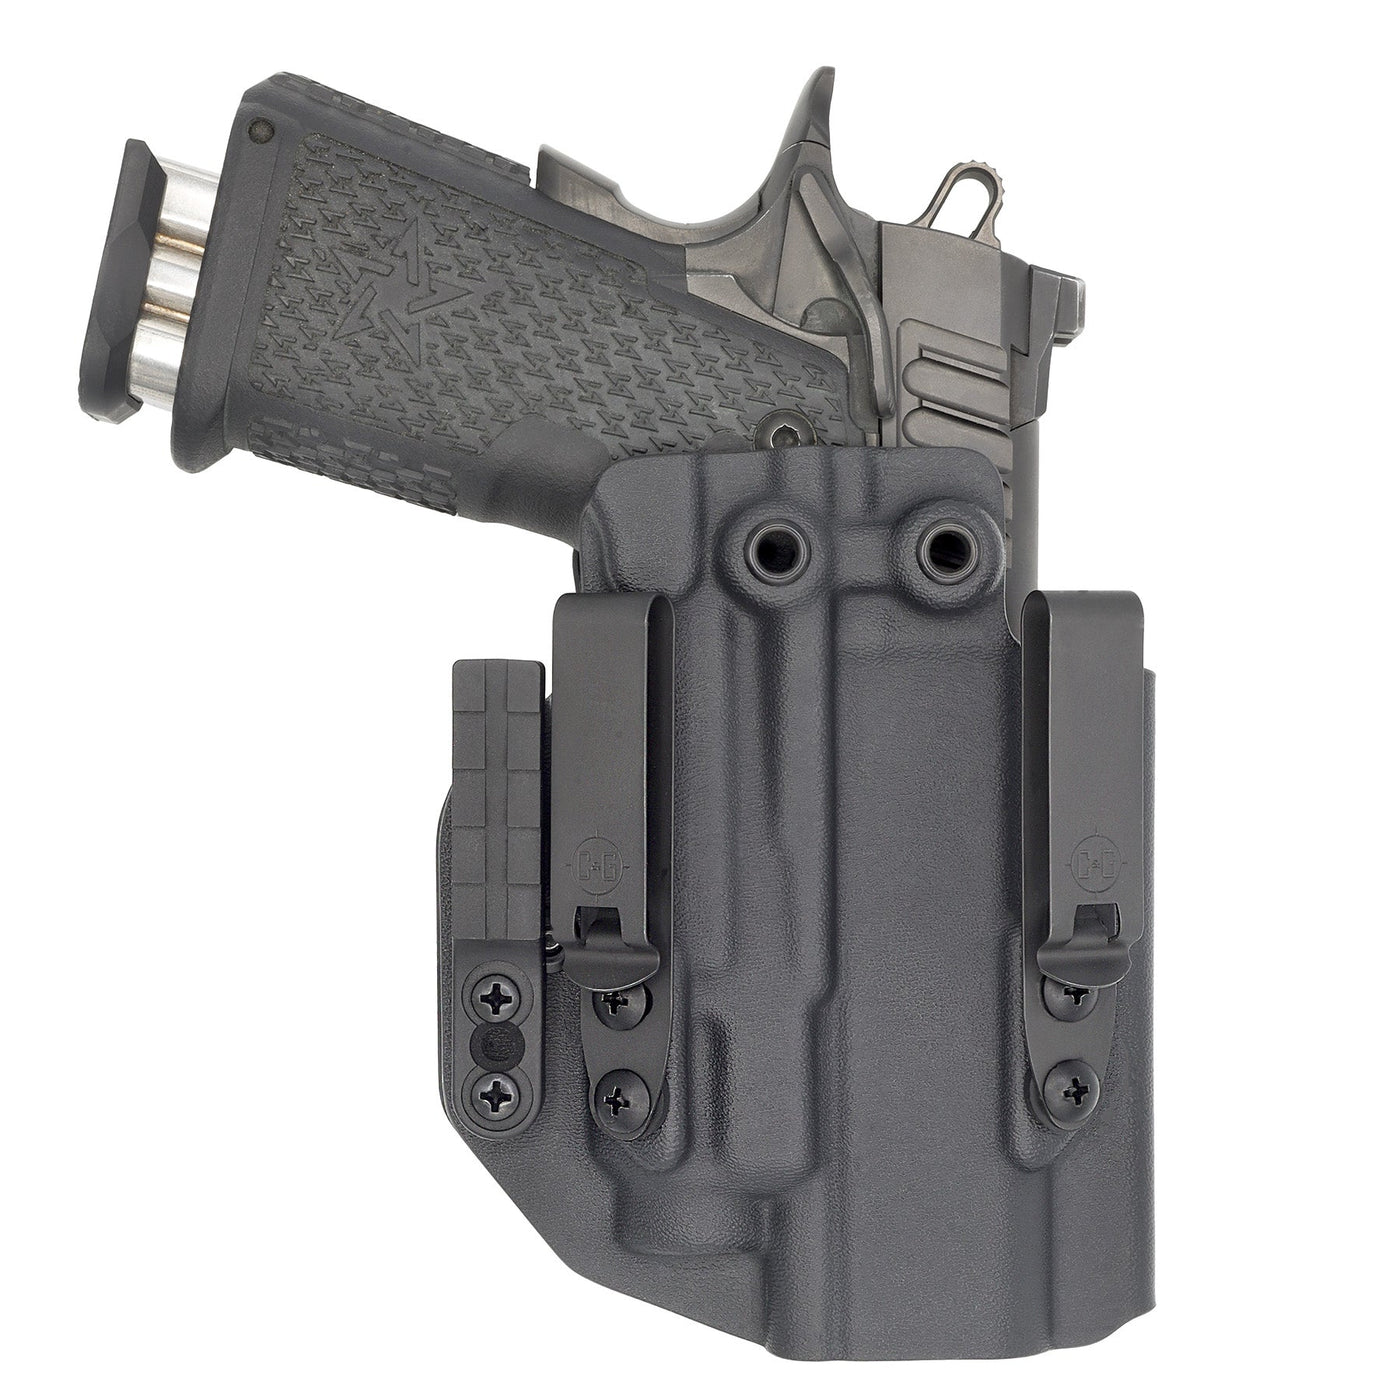 C&G Holsters Quickship IWB ALPHA UPGRADE Tactical 1911 DS Prodigy Streamlight TLR7/a in holstered position